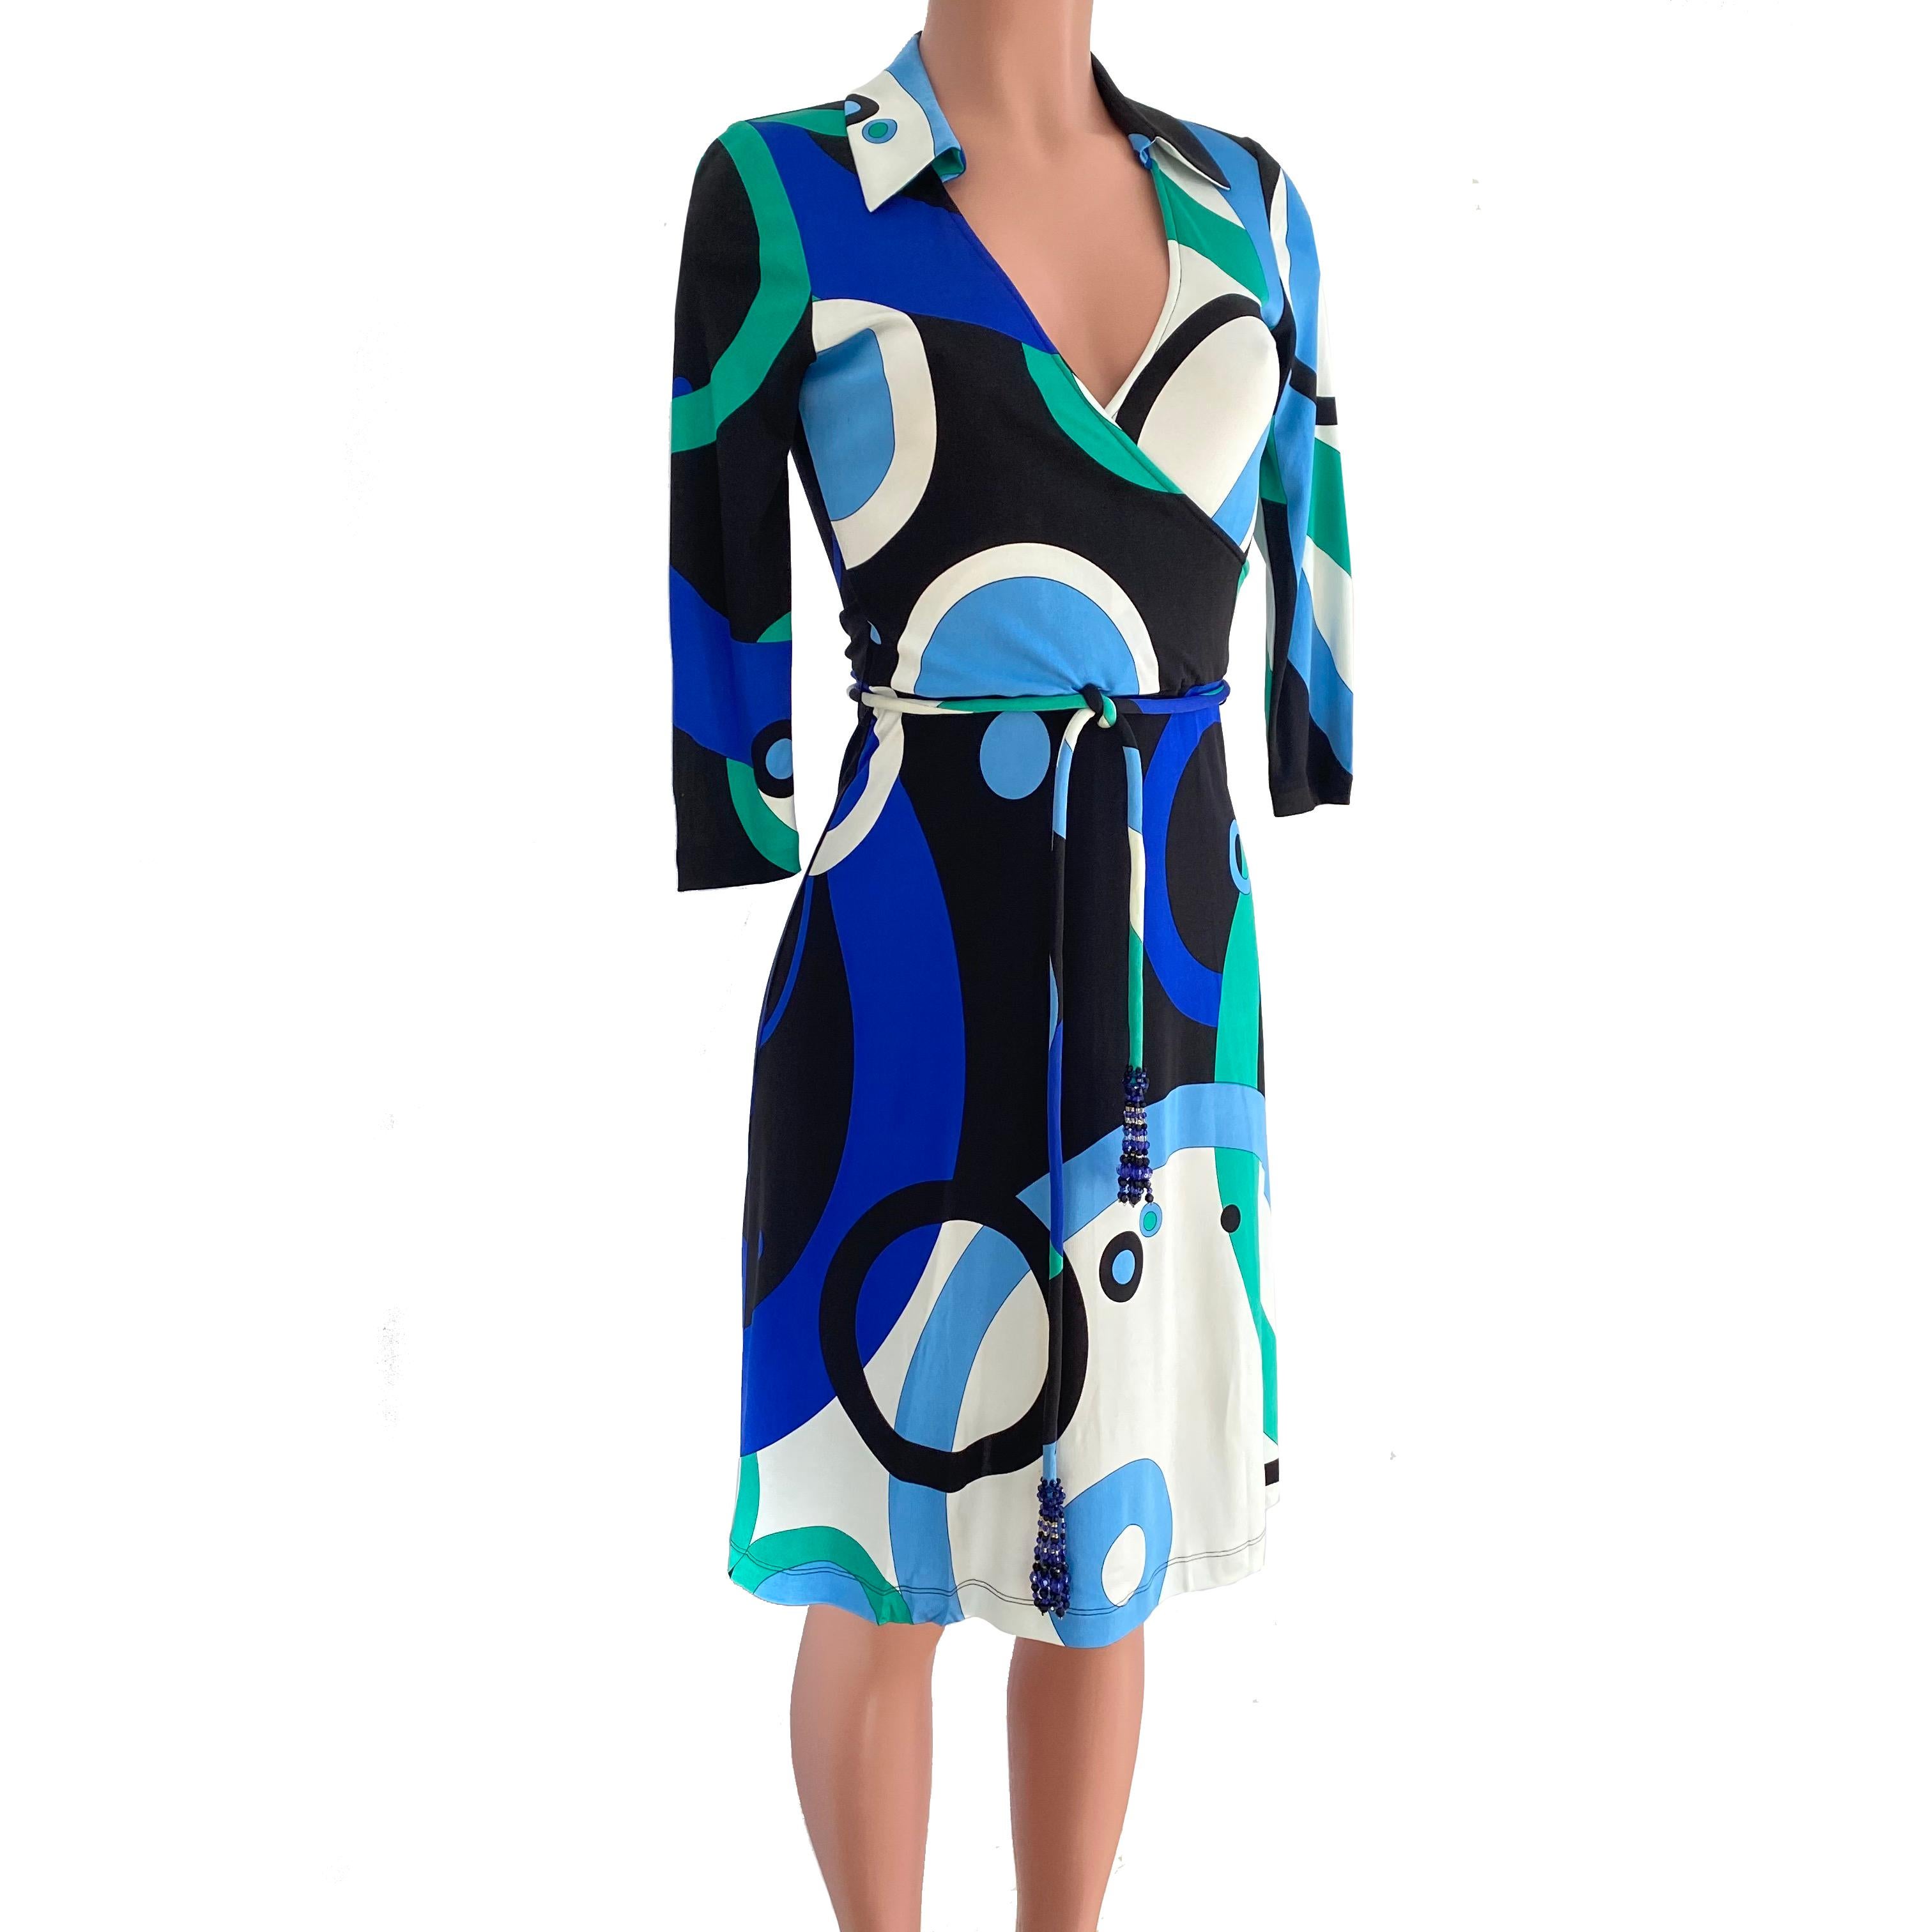 Mock wrap Shirt-collar dress with A-line skirt and 3/4 sleeves.
Original blue galaxy print from Flora Kung.
Detachable cord belt with blue beads–can be switched to a day belt for a more casual look.
US 2 = UK 6 = French 34
Condition: Pristine. Brand